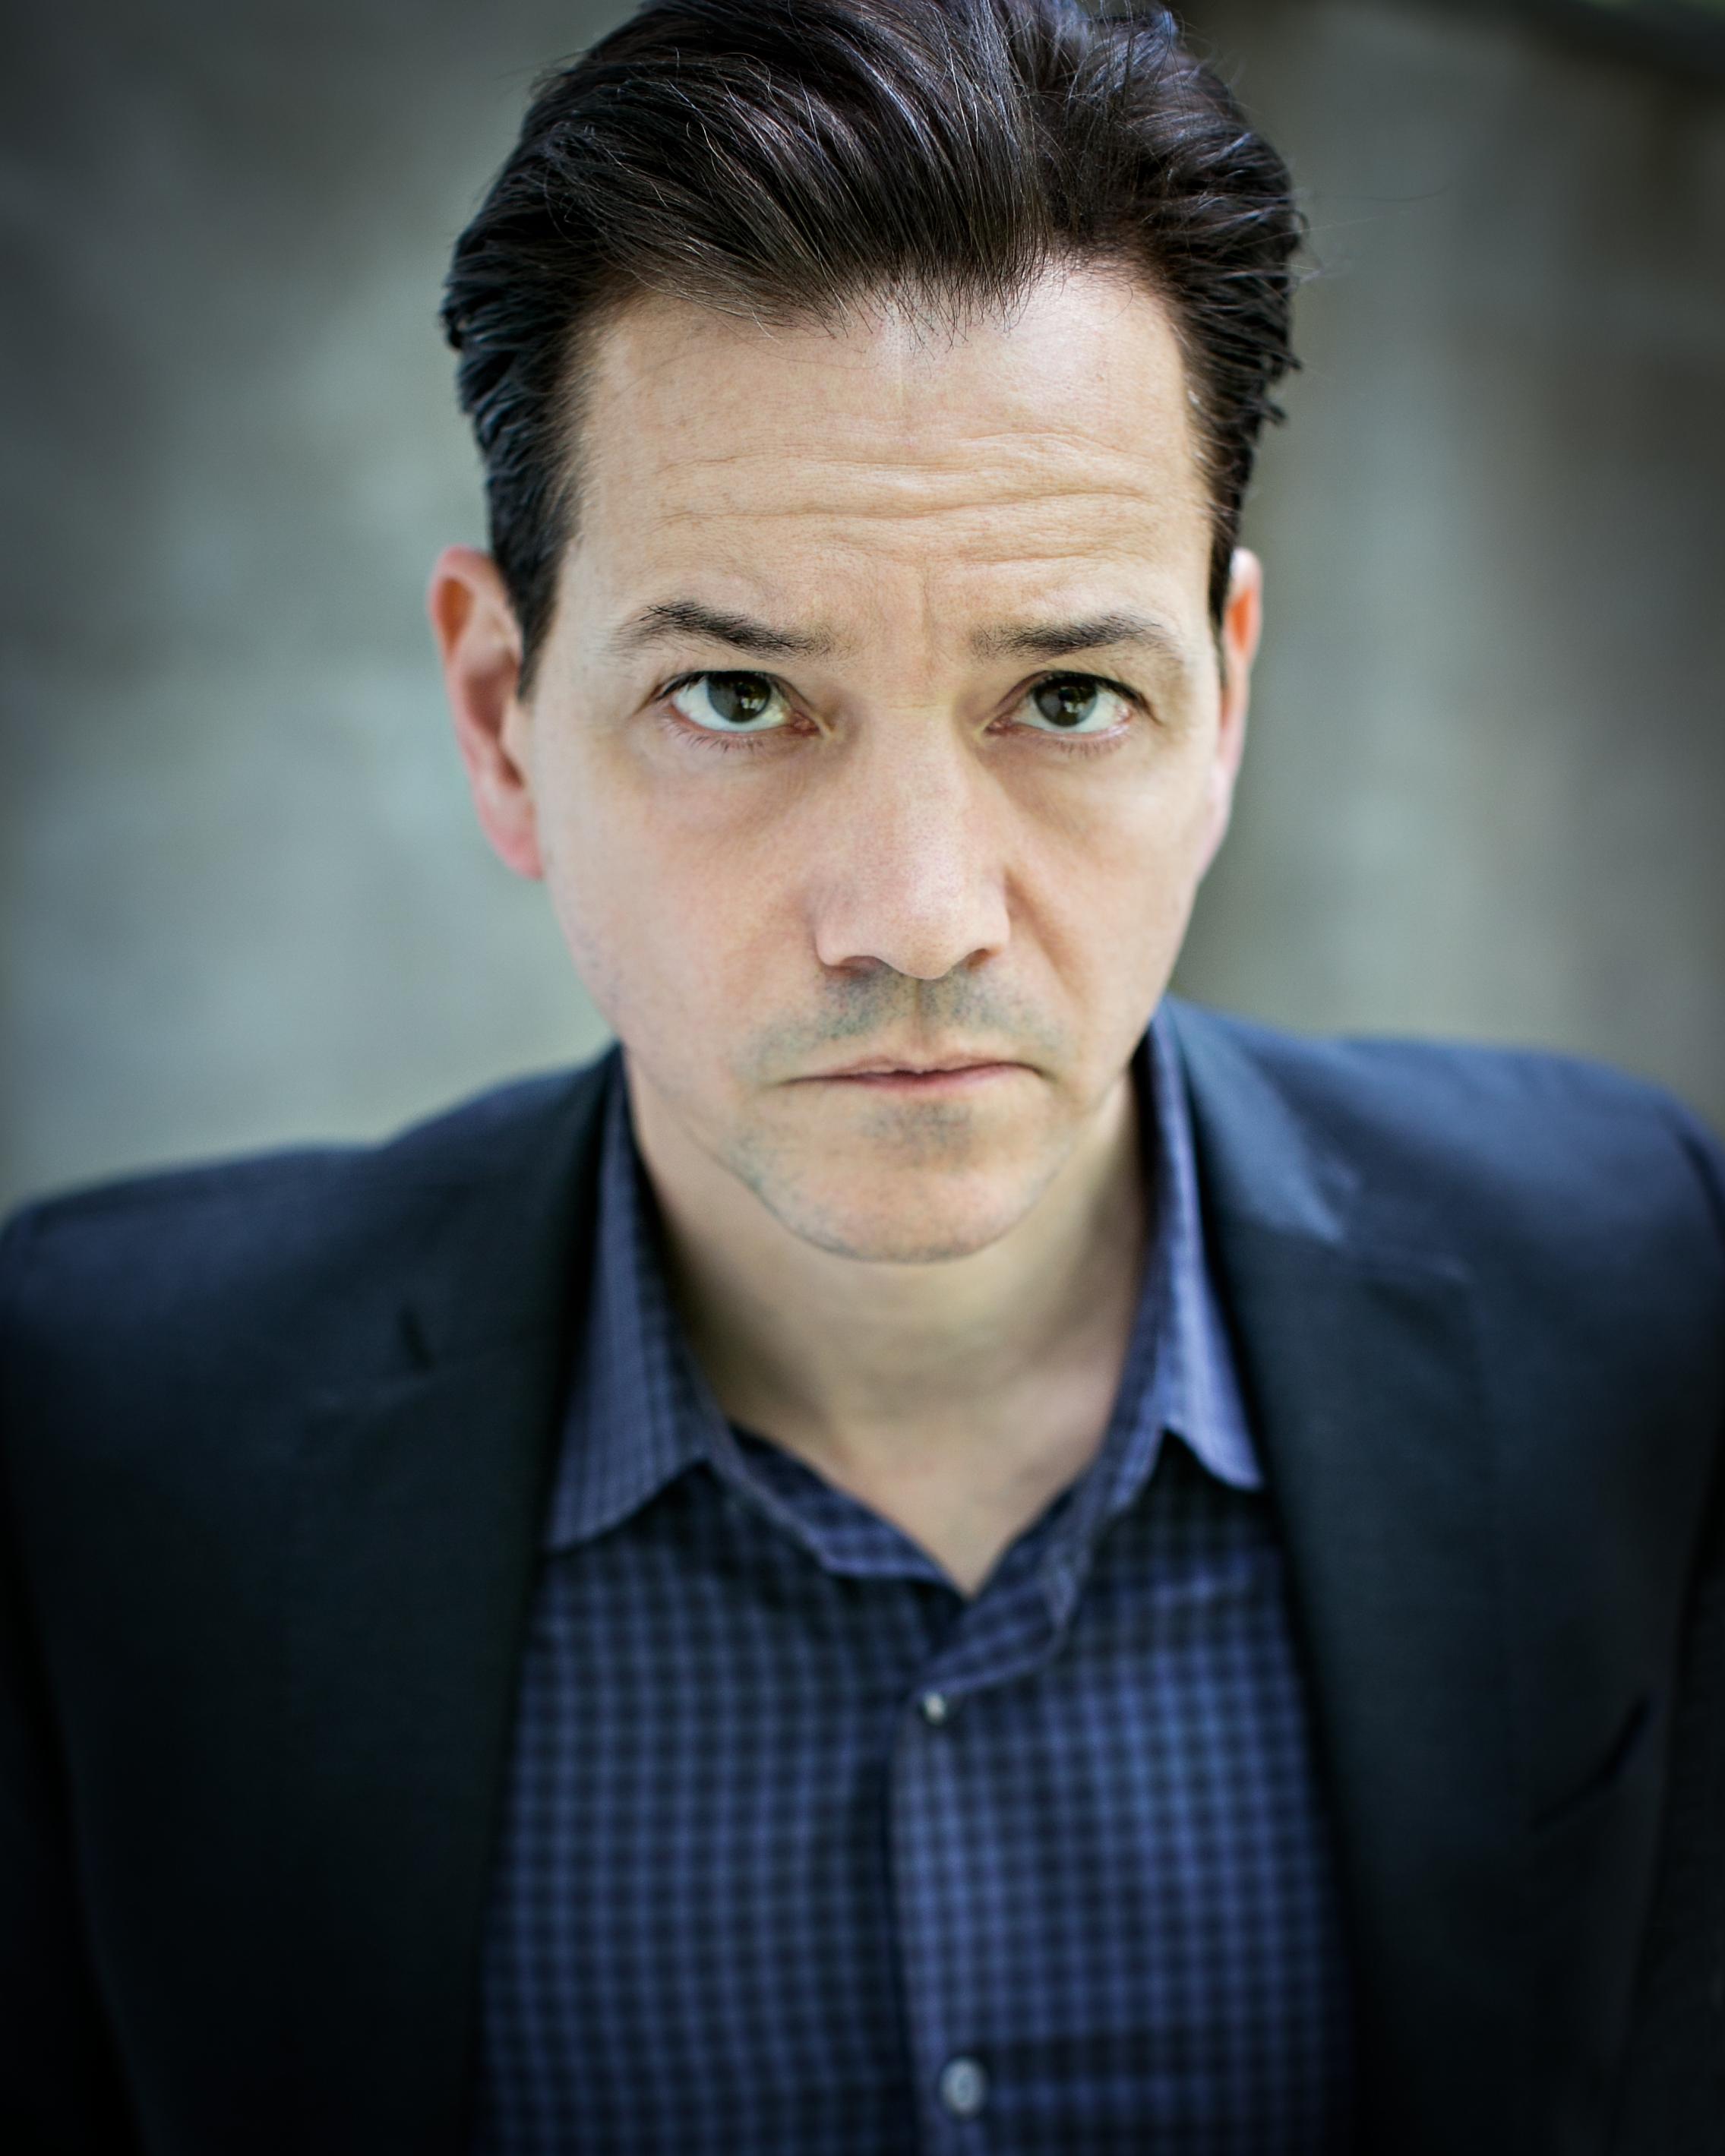 Frank Whaley image